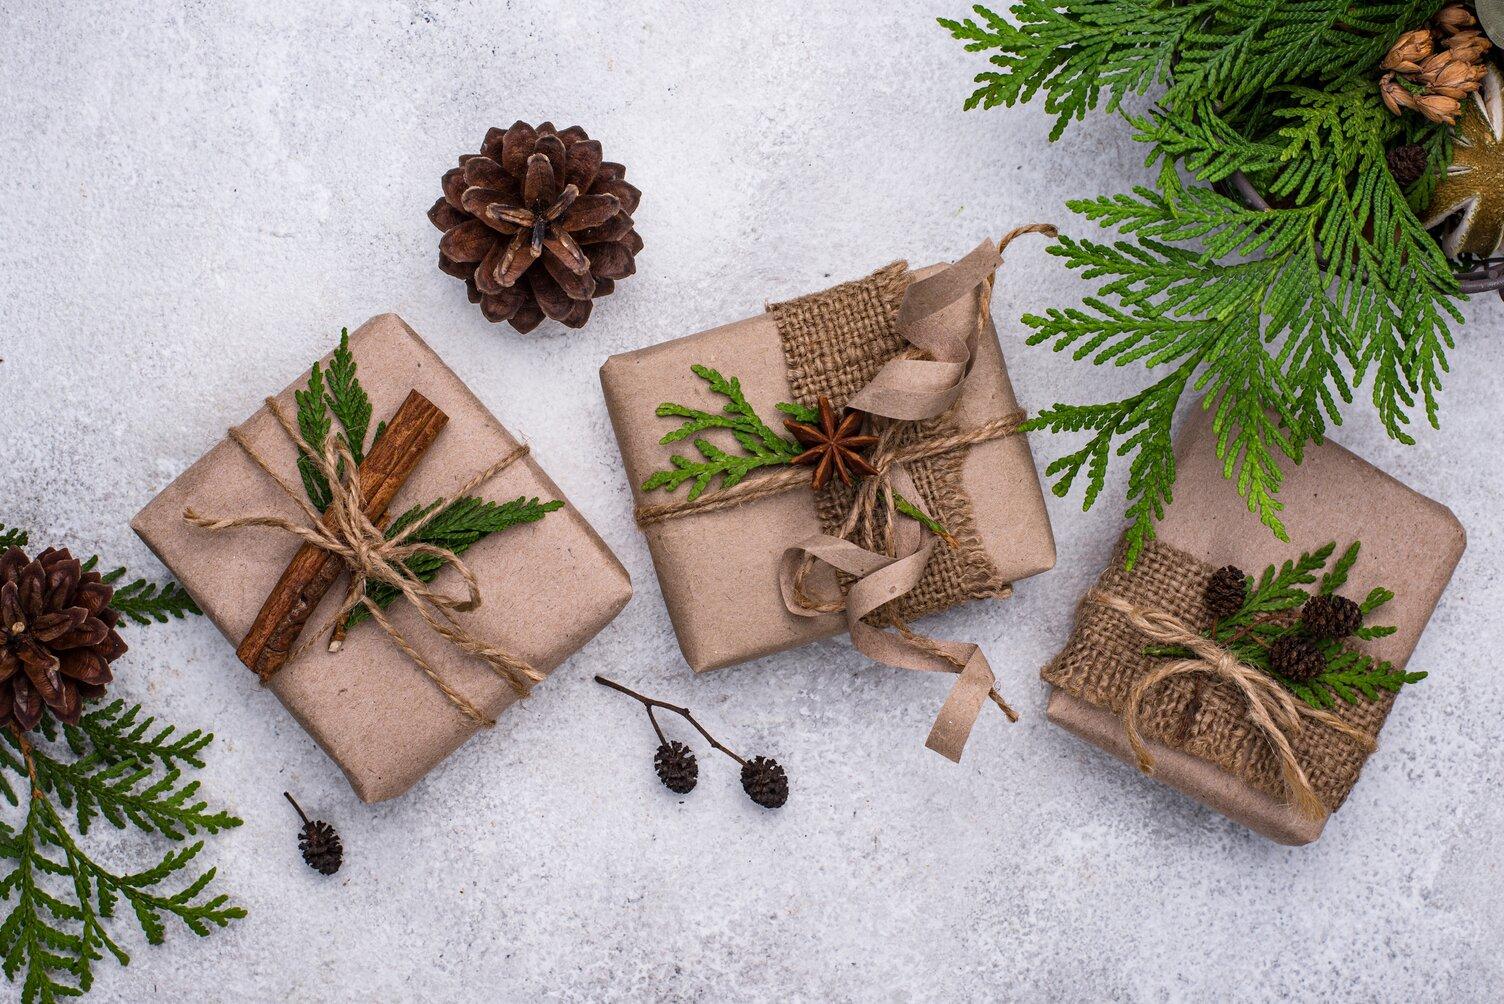 Gifts from the Heart: 10 Homemade Sustainable Christmas Gift Ideas